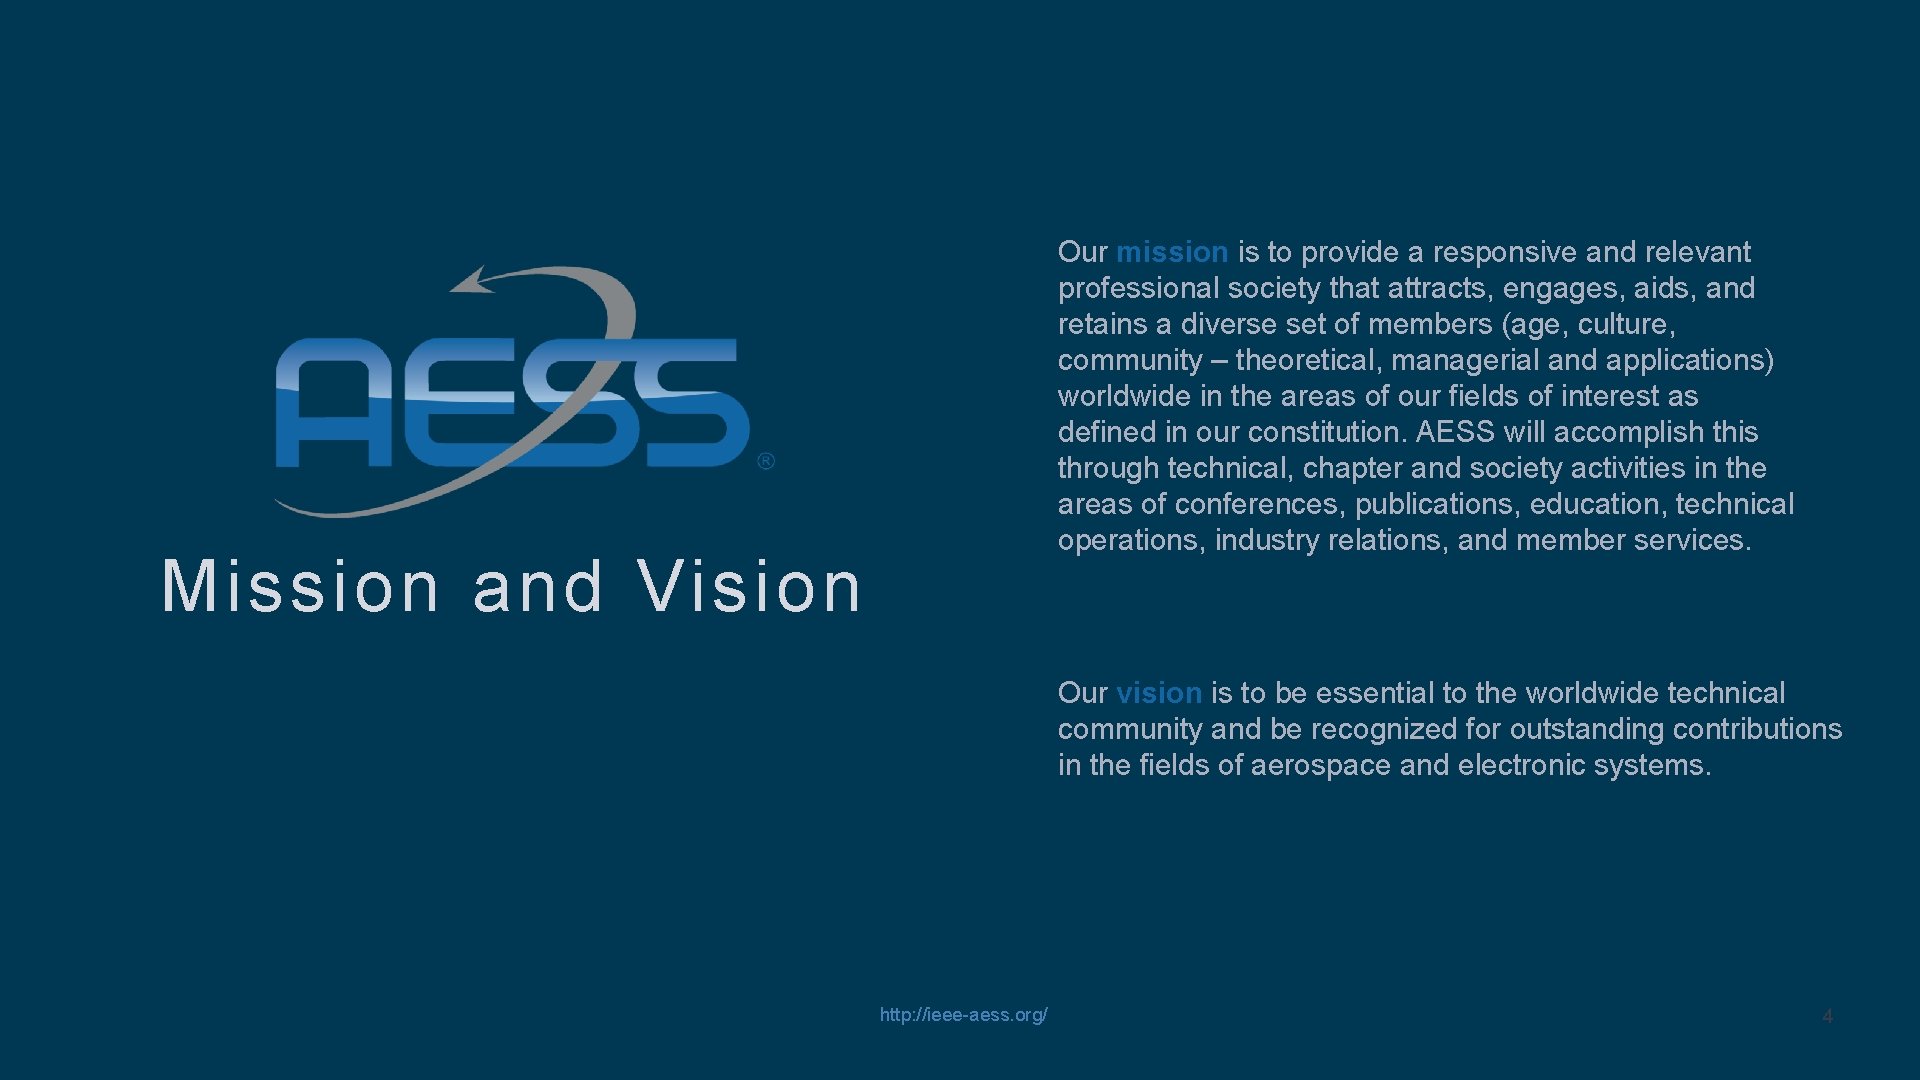 Our mission is to provide a responsive and relevant professional society that attracts, engages,